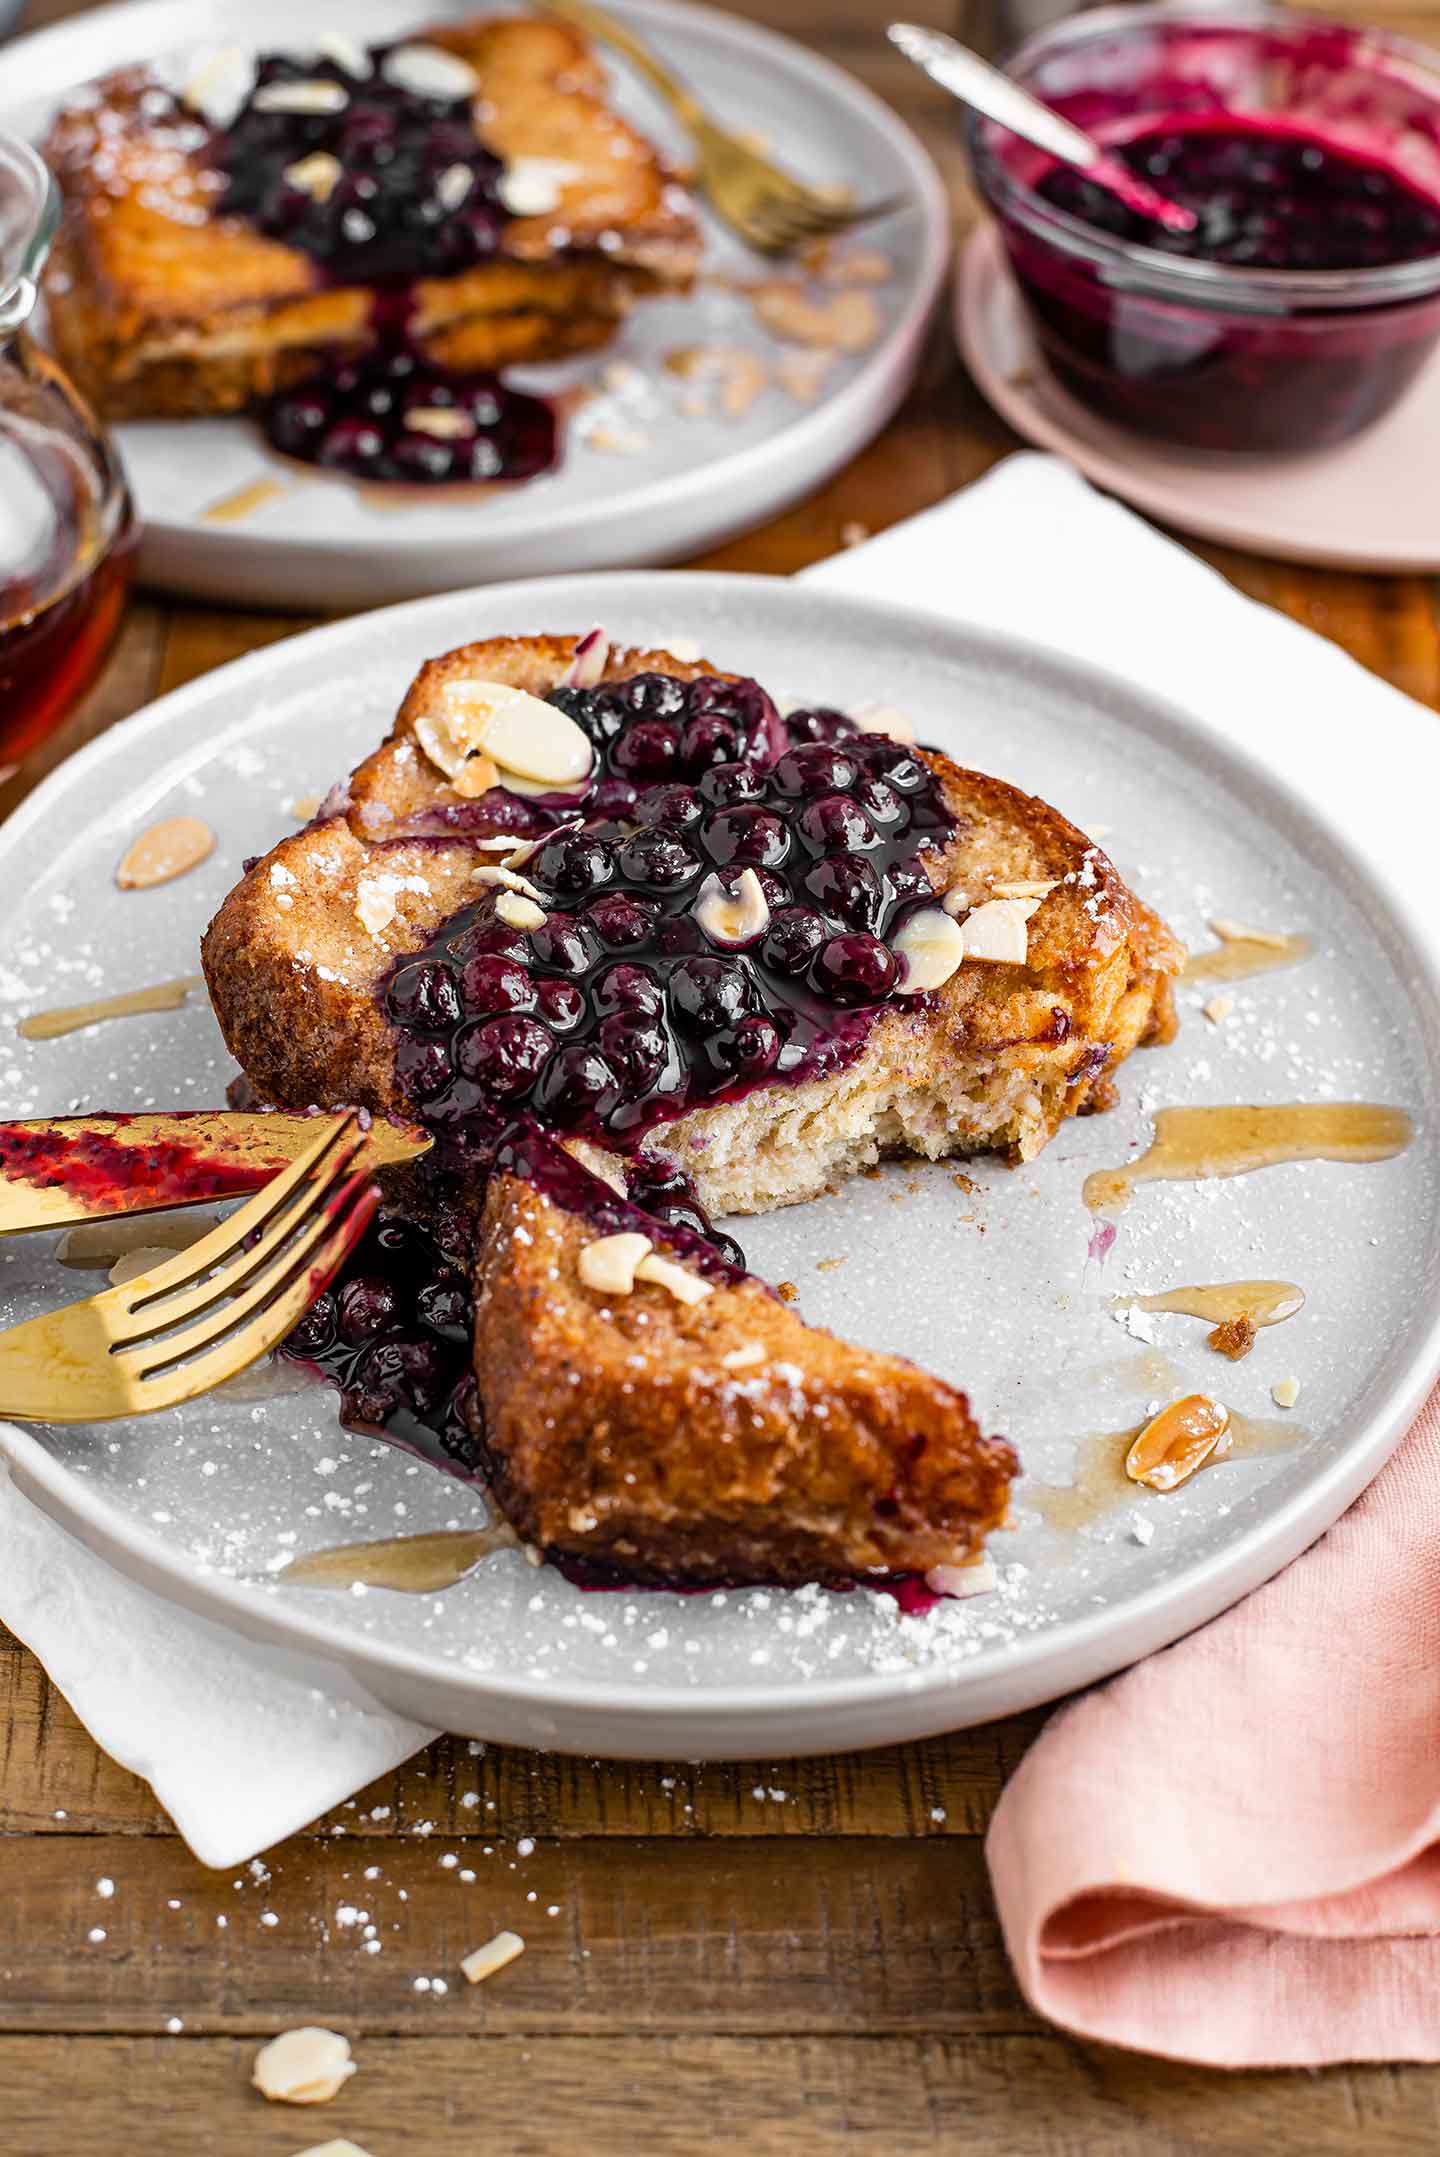 Side view of two golden slices of french toast stacked on one another, topped with a blueberry sauce, toasted sliced almonds, and drizzled with maple syrup.